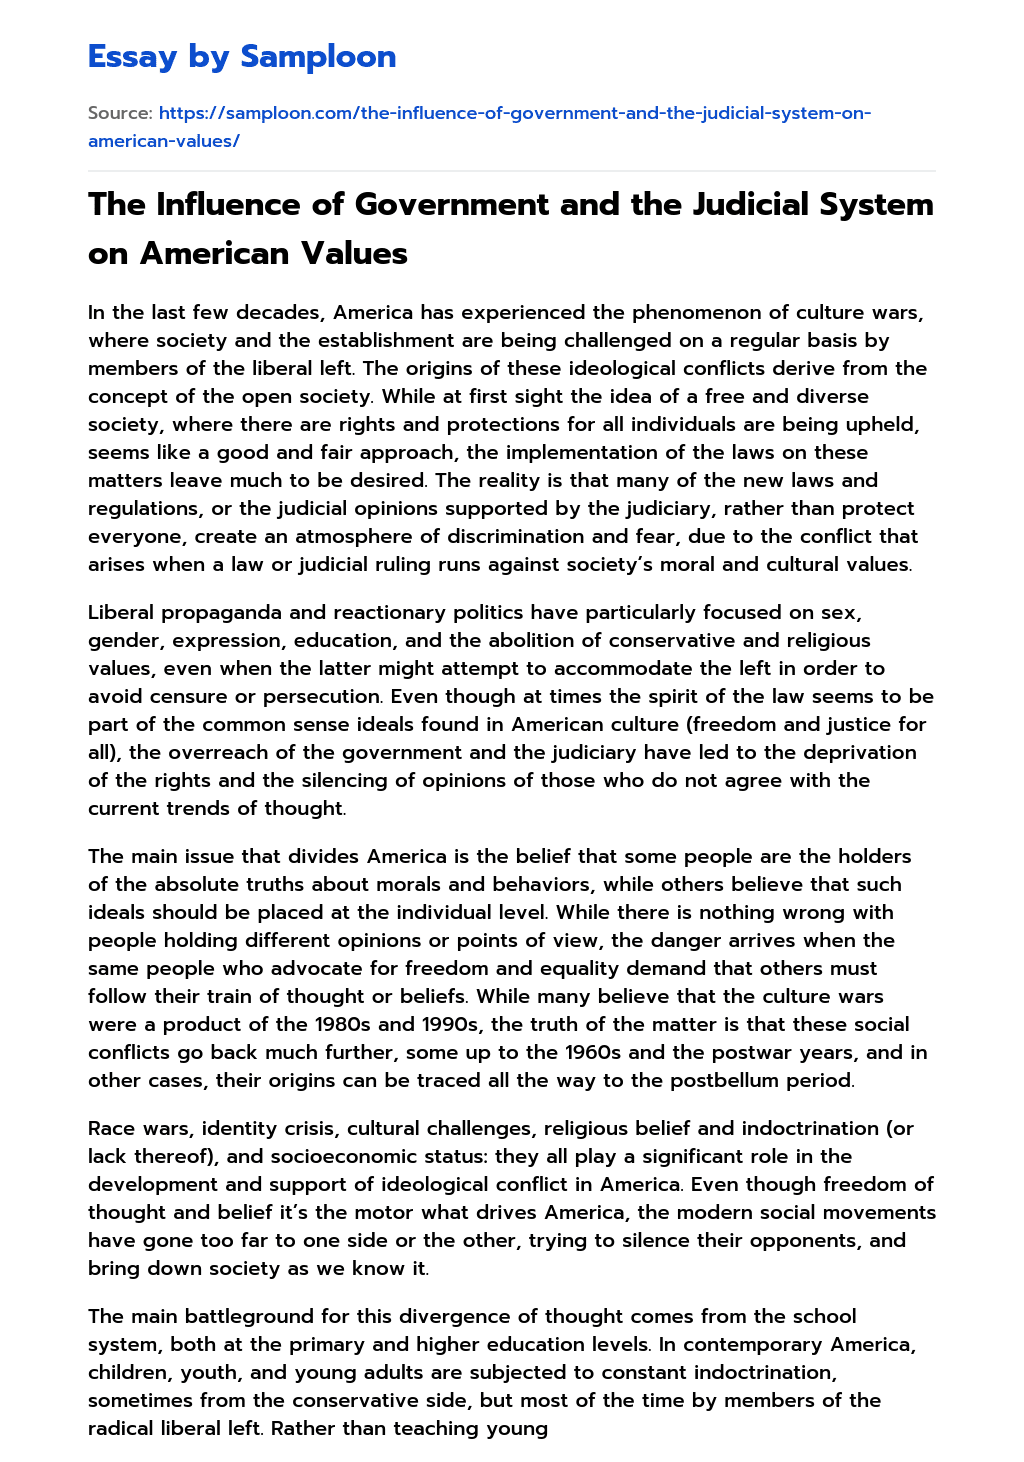 The Influence of Government and the Judicial System on American Values essay